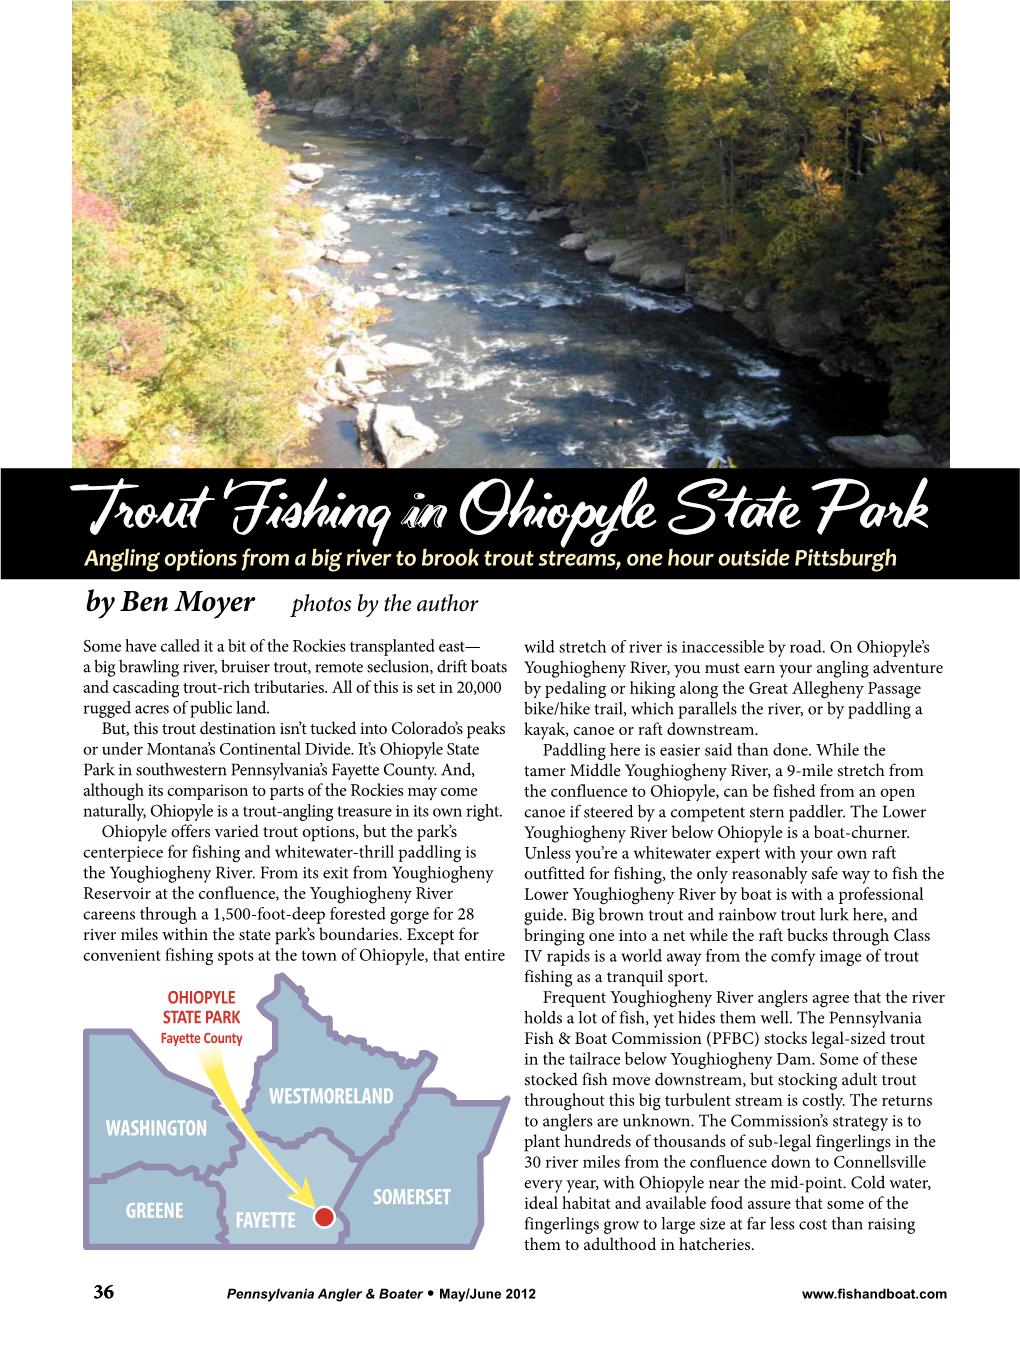 Trout Fishing in Ohiopyle State Park Angling Options from a Big River to Brook Trout Streams, One Hour Outside Pittsburgh by Ben Moyer Photos by the Author